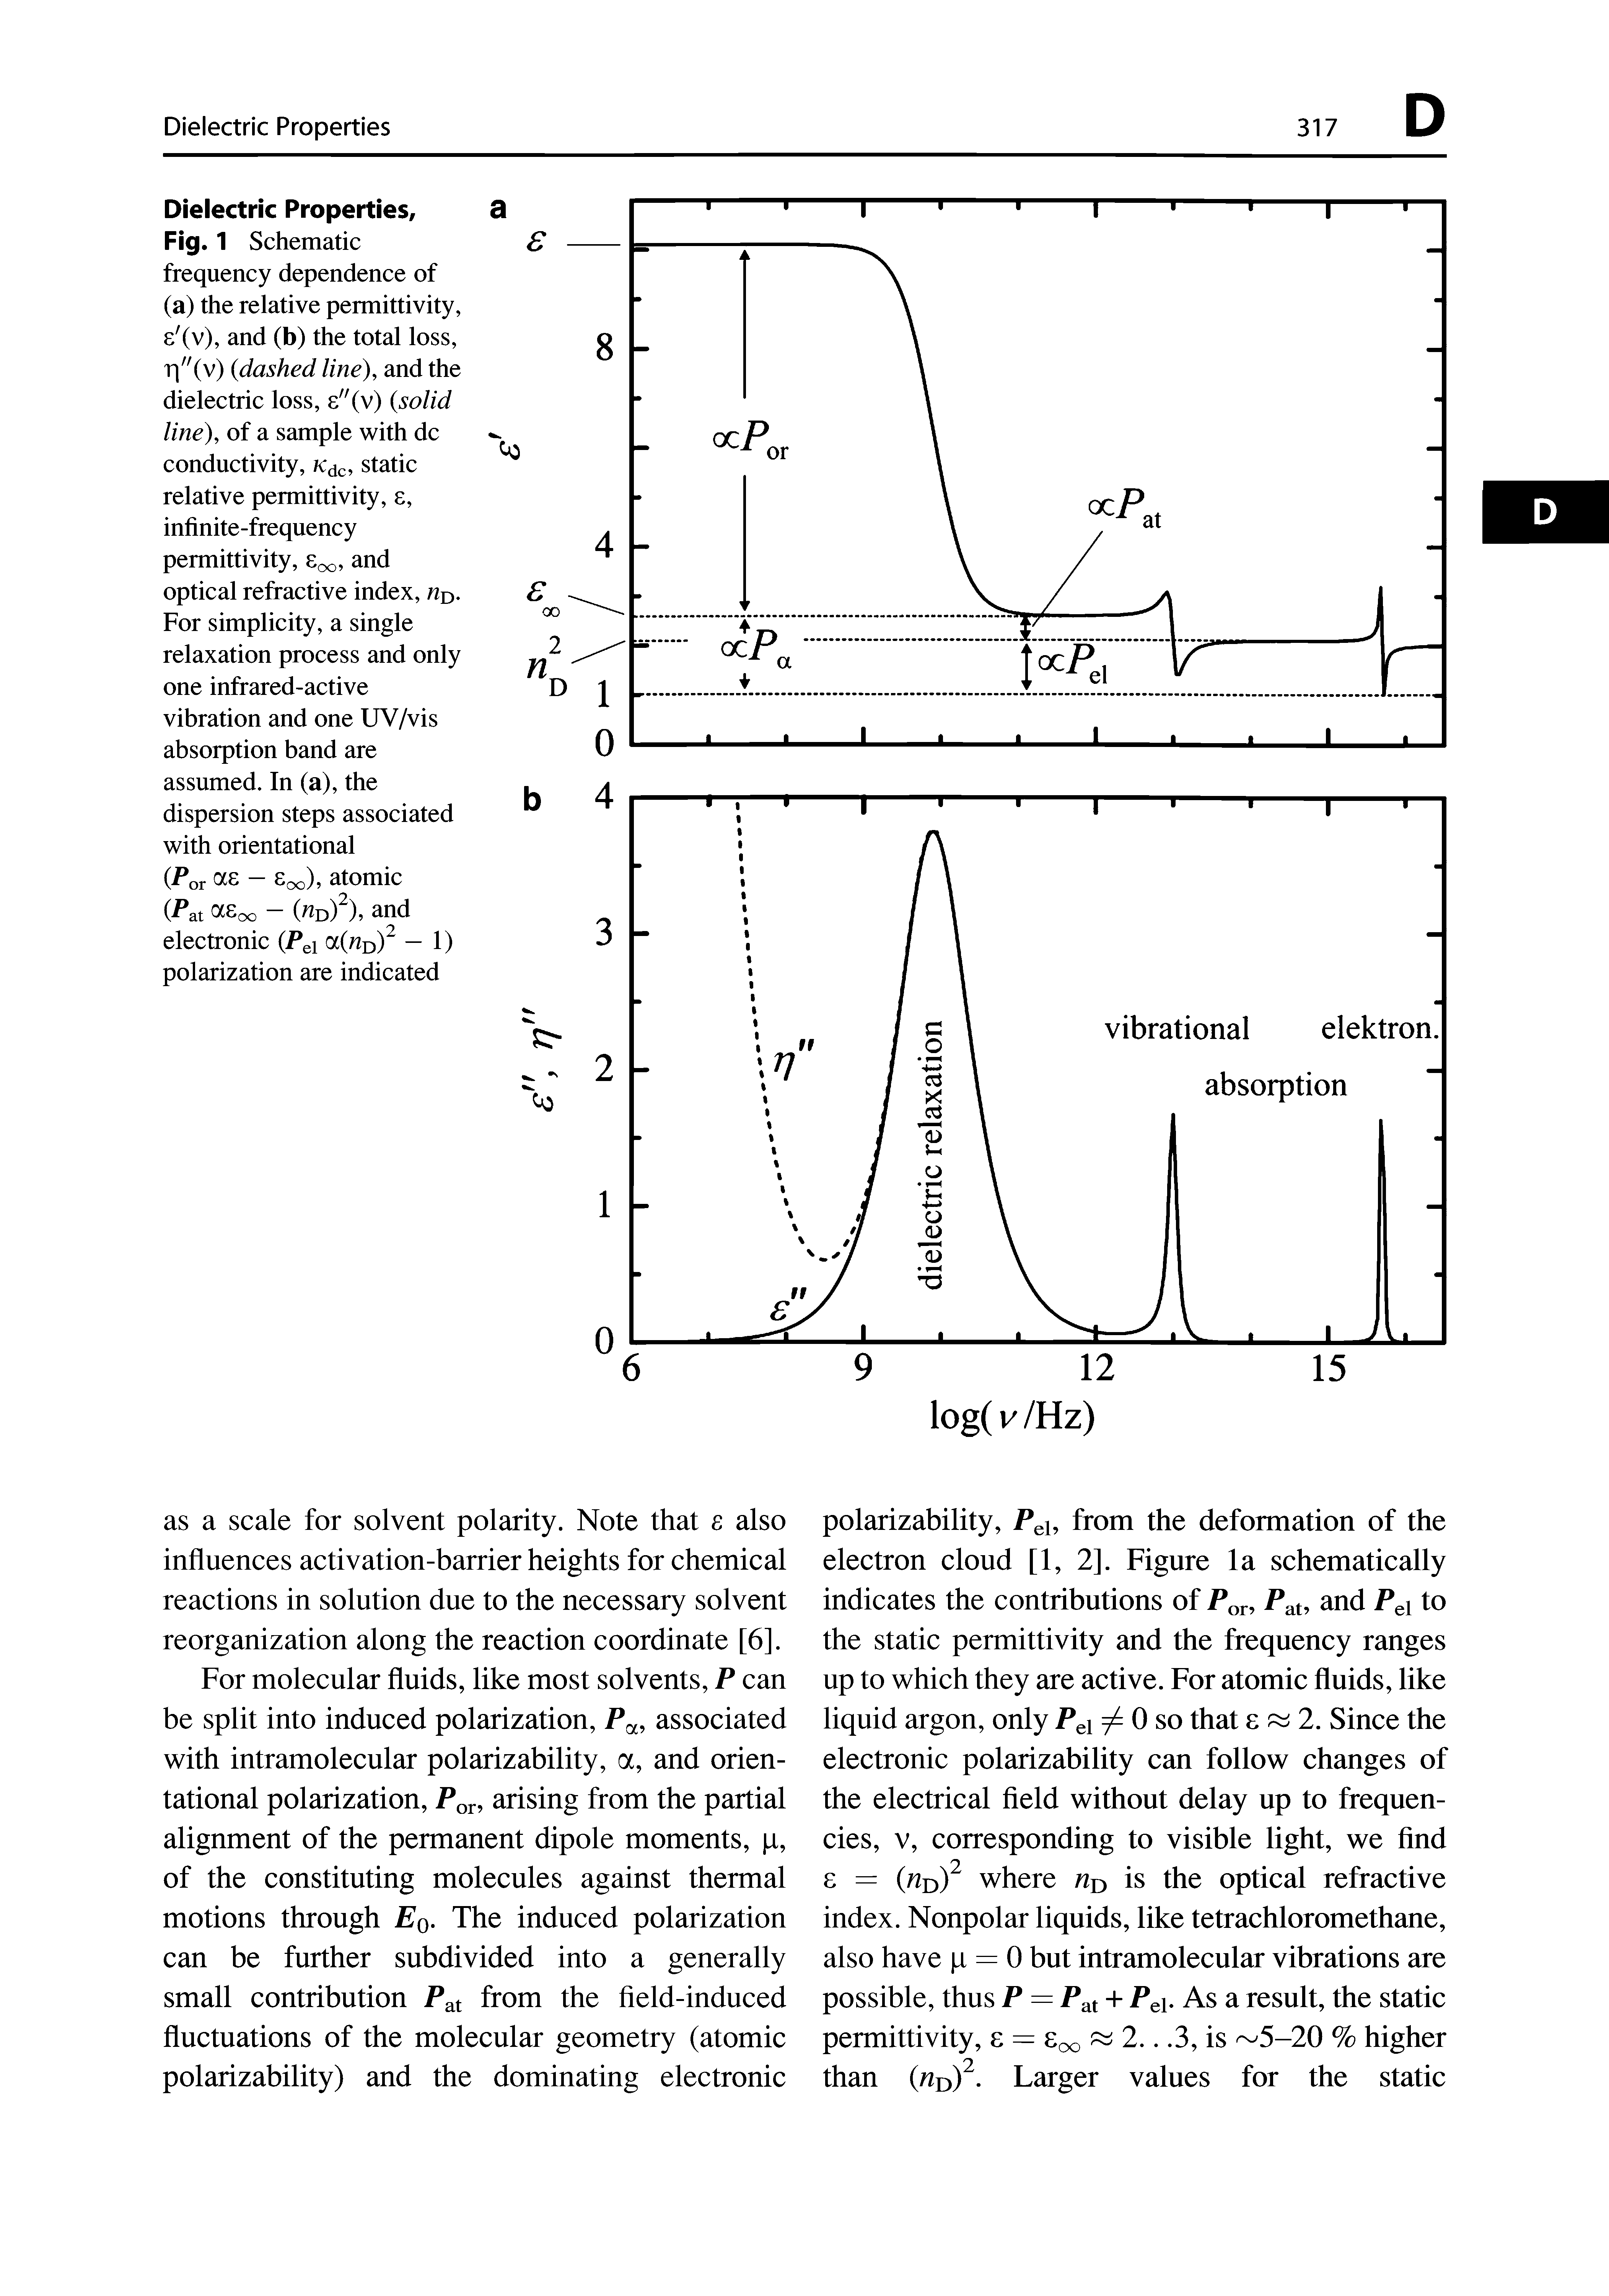 Fig. 1 Schematic frequency dependence of (a) the relative permittivity, s (v), and (b) the total loss, T "(v) dashed line), and the dielectric loss, s"(v) solid line), of a sample with dc conductivity, static relative permittivity, 8, infinite-frequency permittivity, and optical refractive index,...